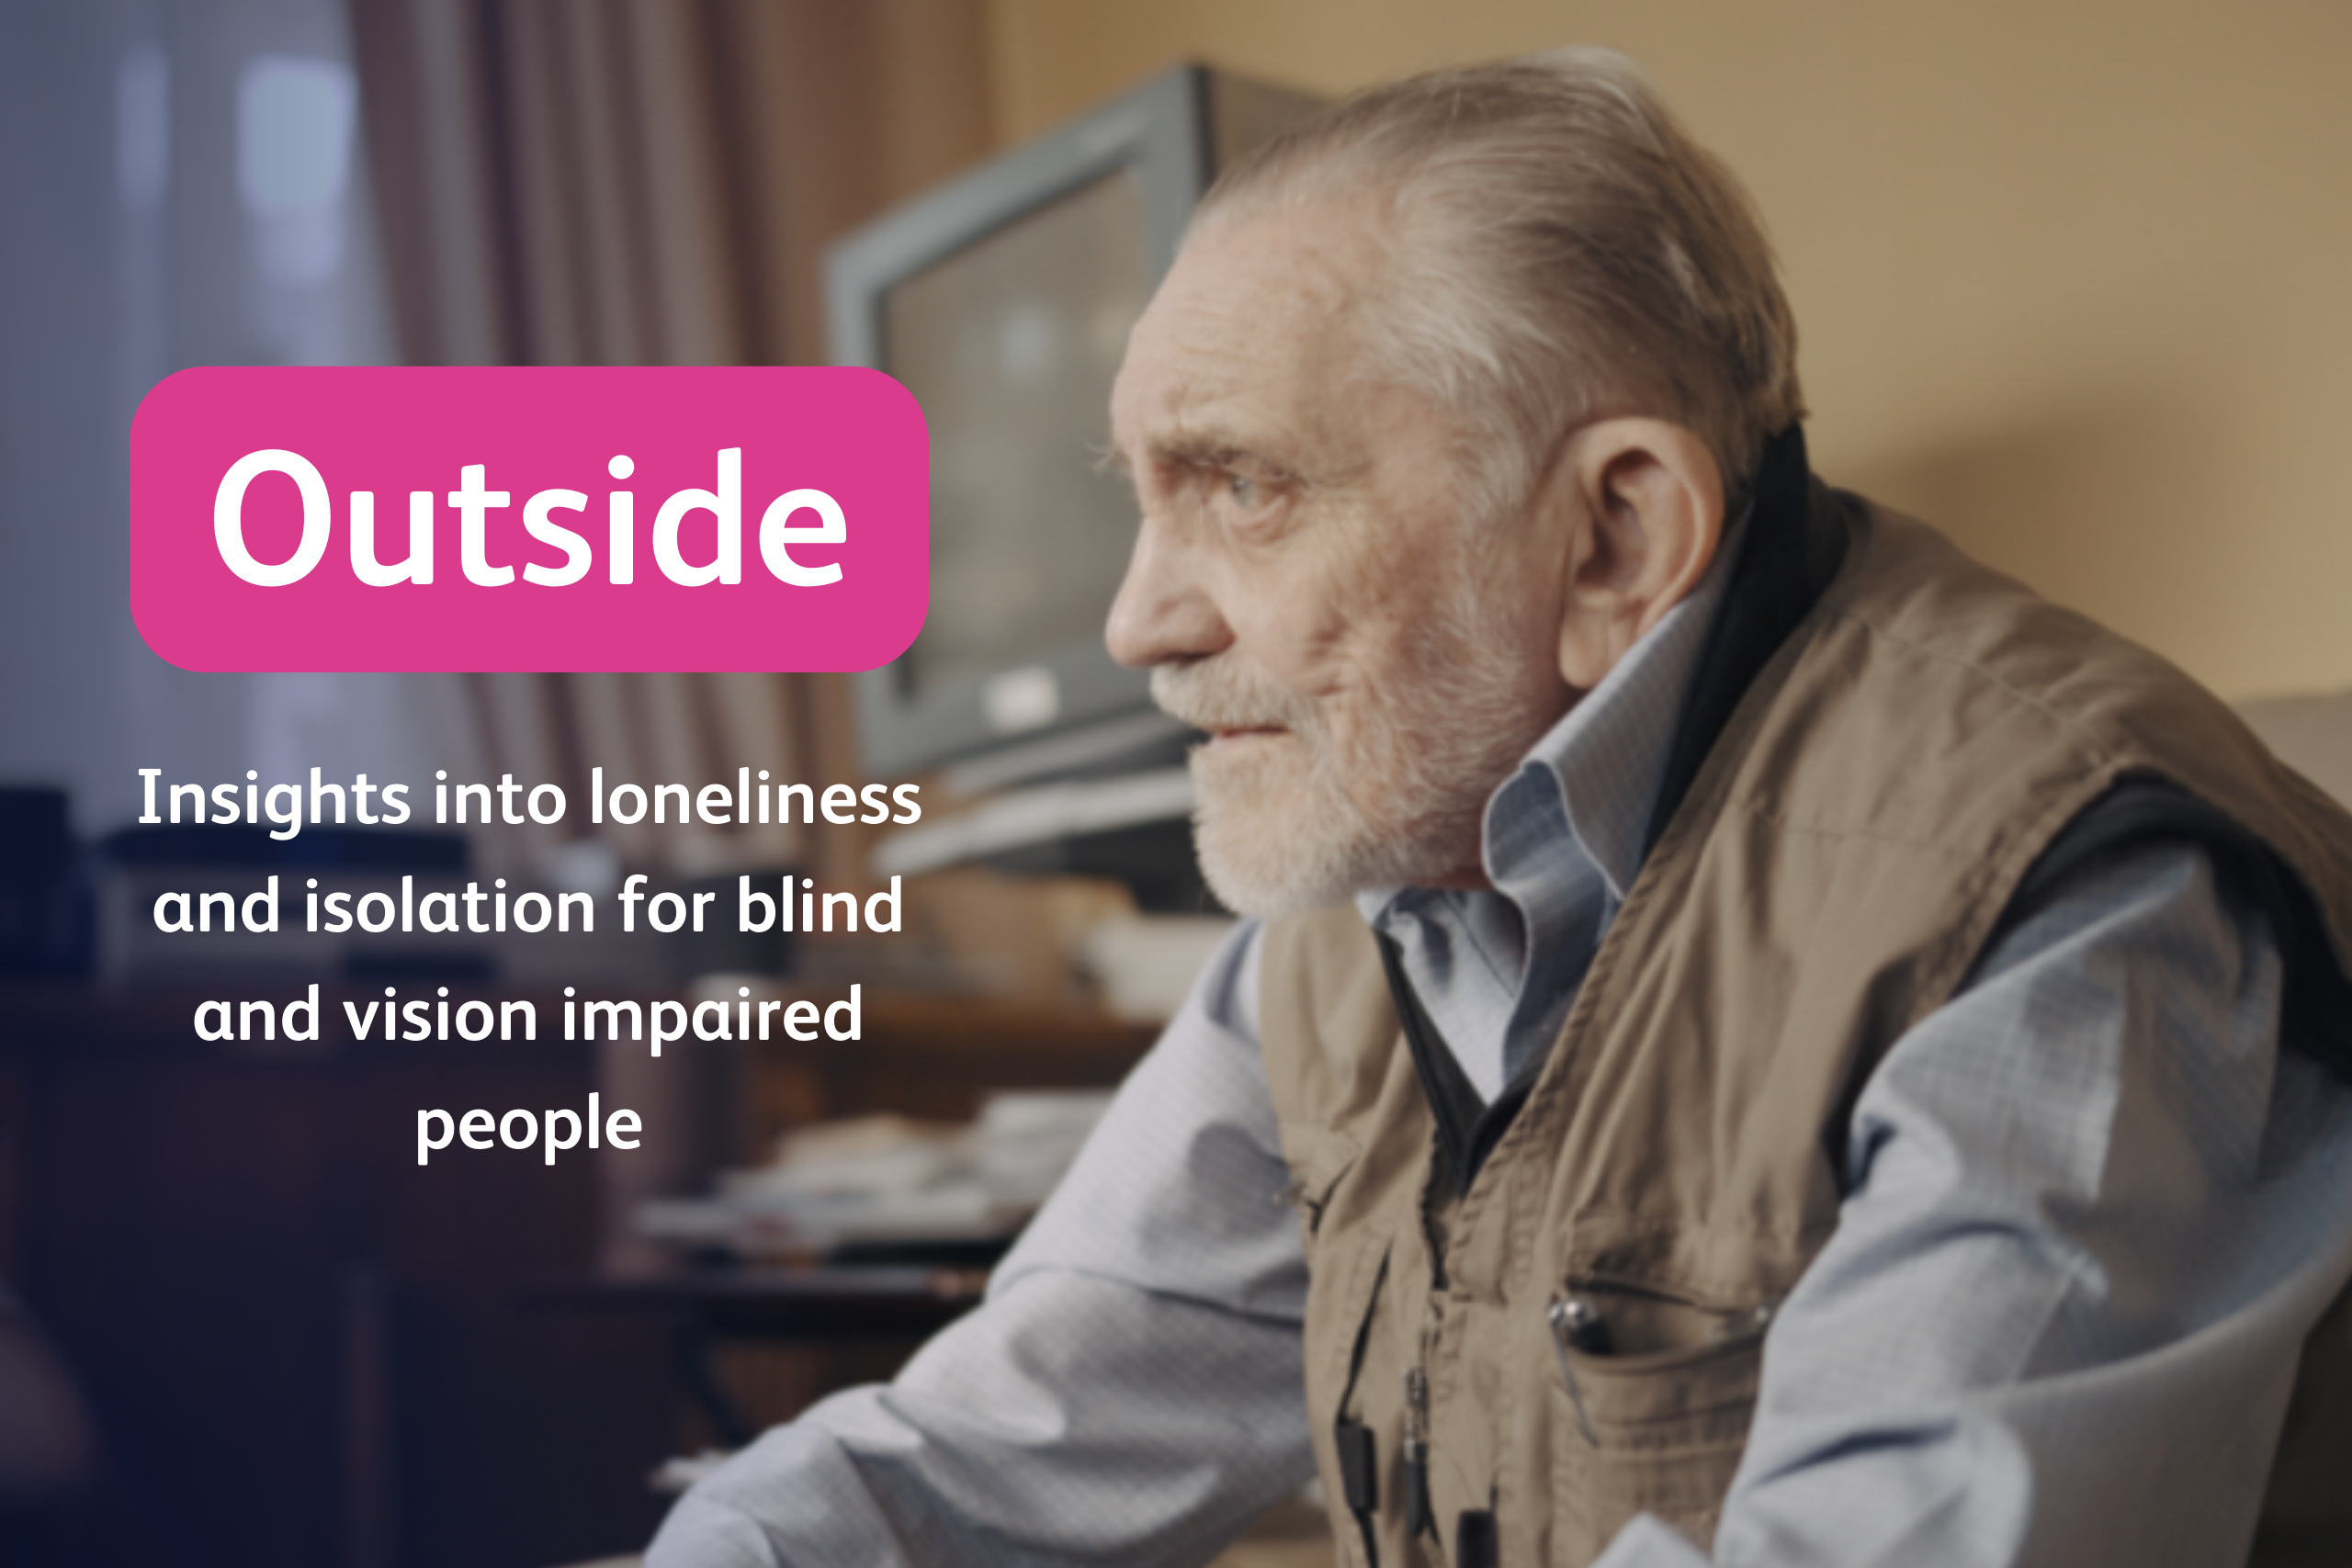 An elderly man looks away from the camera in a grey shirt and khaki coloured vest. The text reads Outside: Insights into loneliness and isolation for blind and vision impaired people